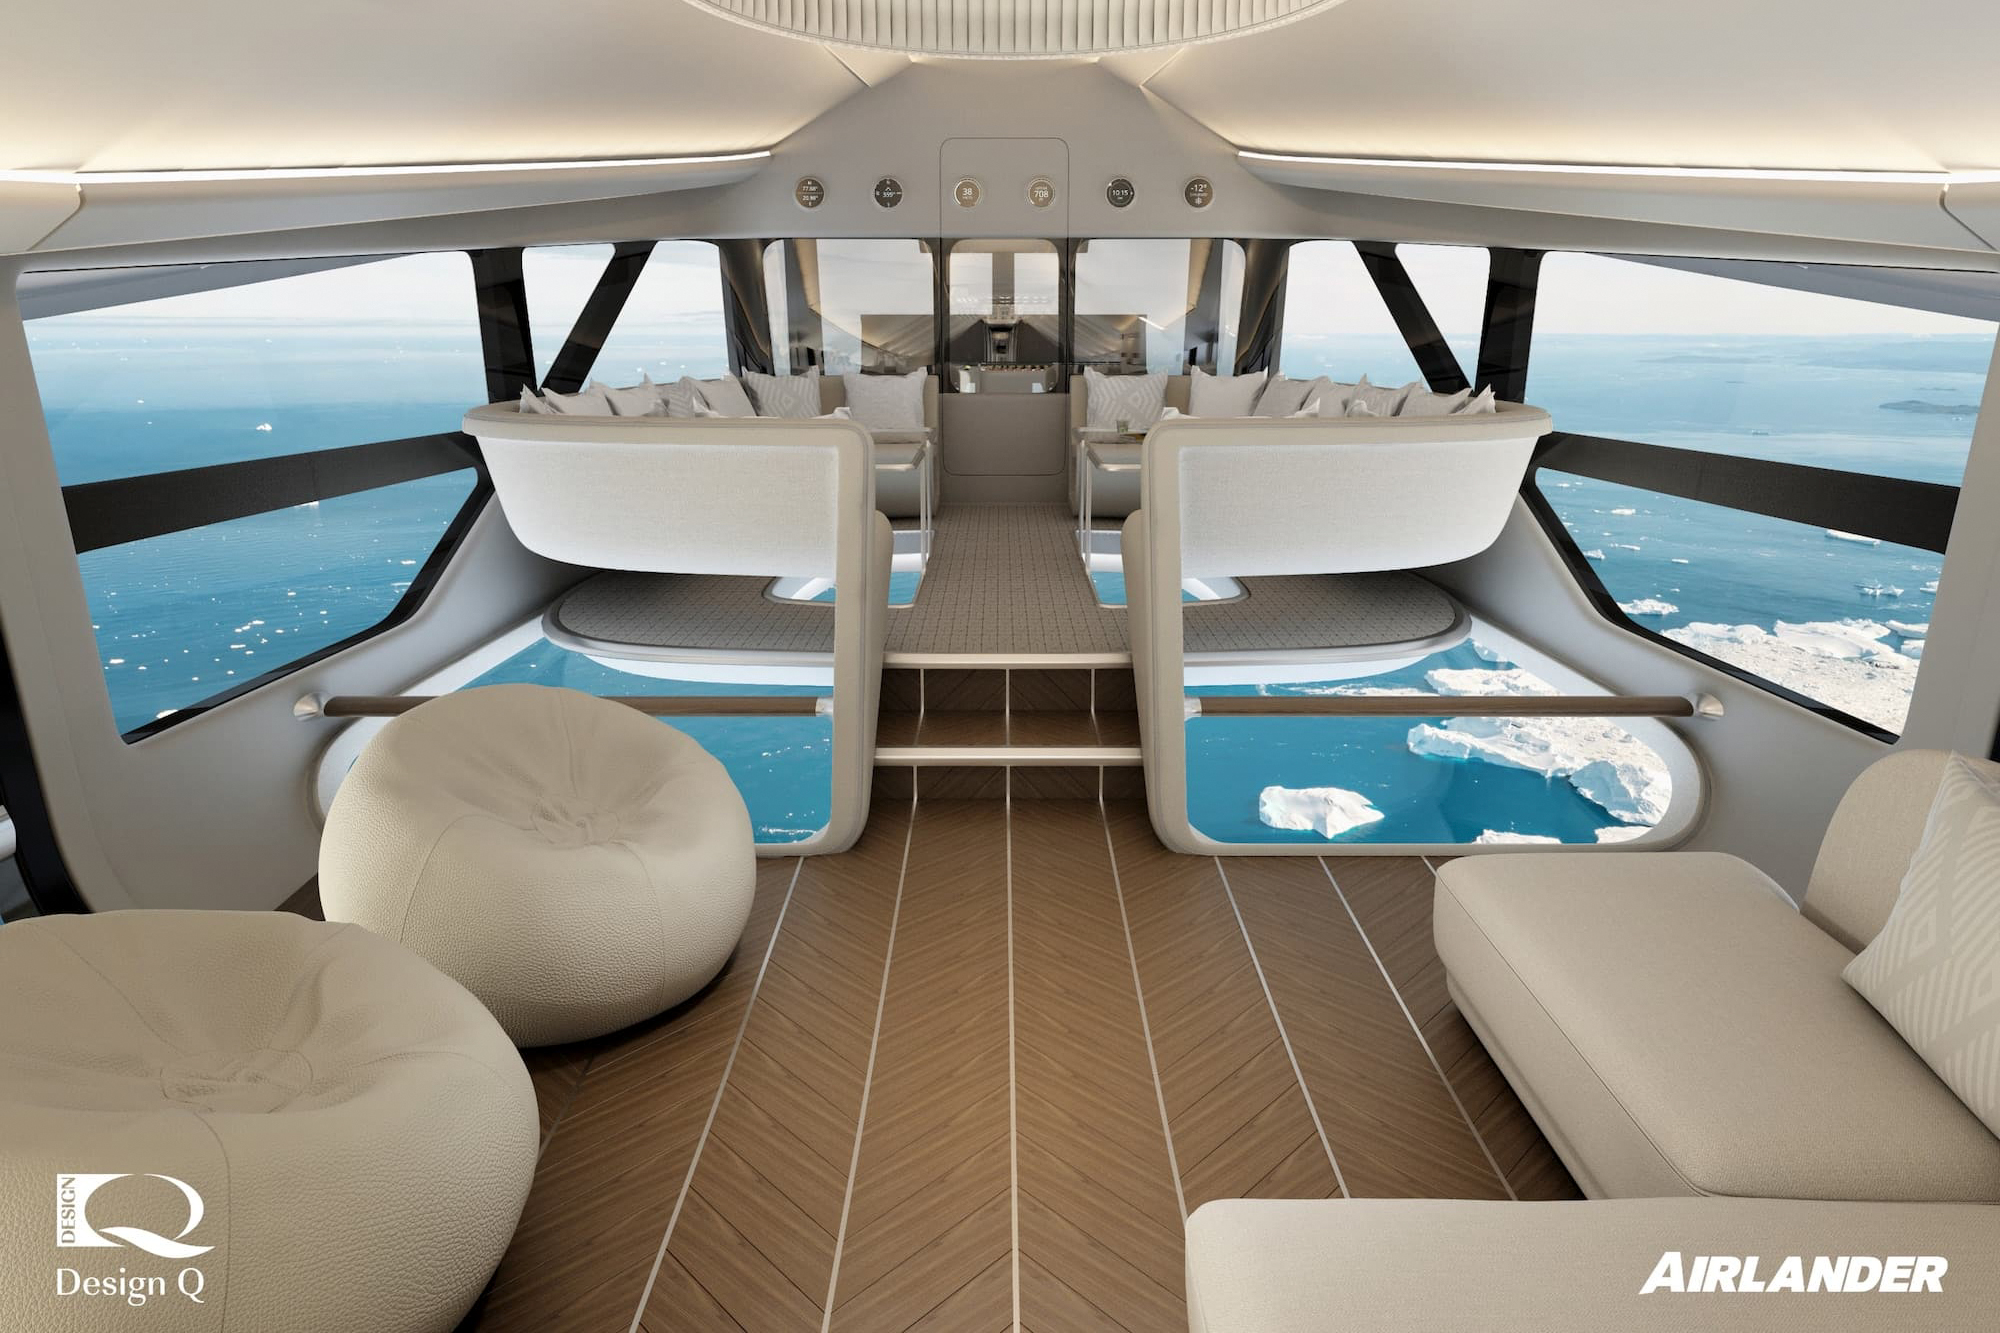 Airlander 10 by Hybrid Air Vehicles Limited and Design Q featured